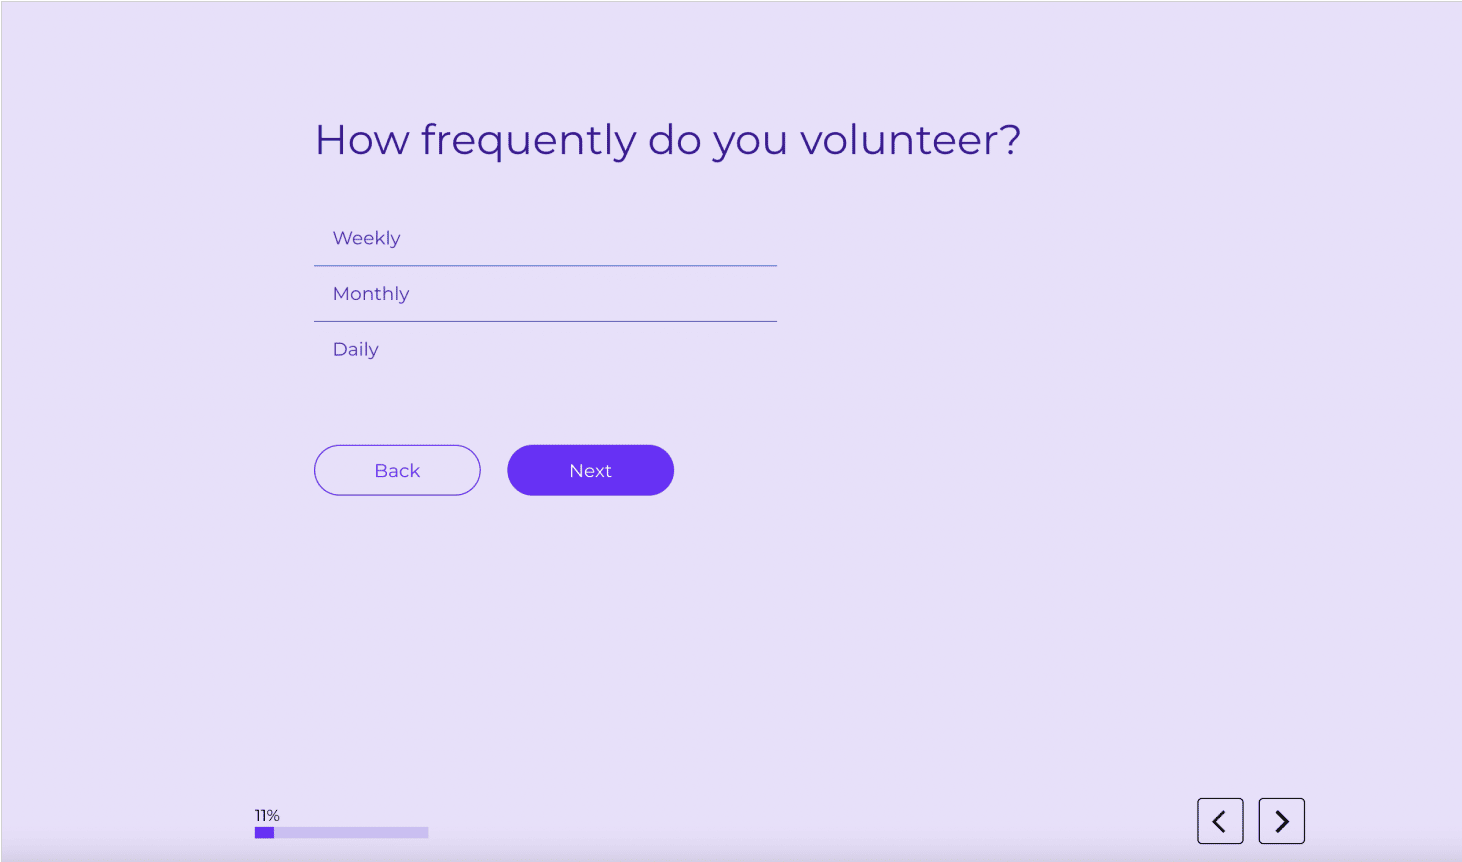 question about frequency of volunteering